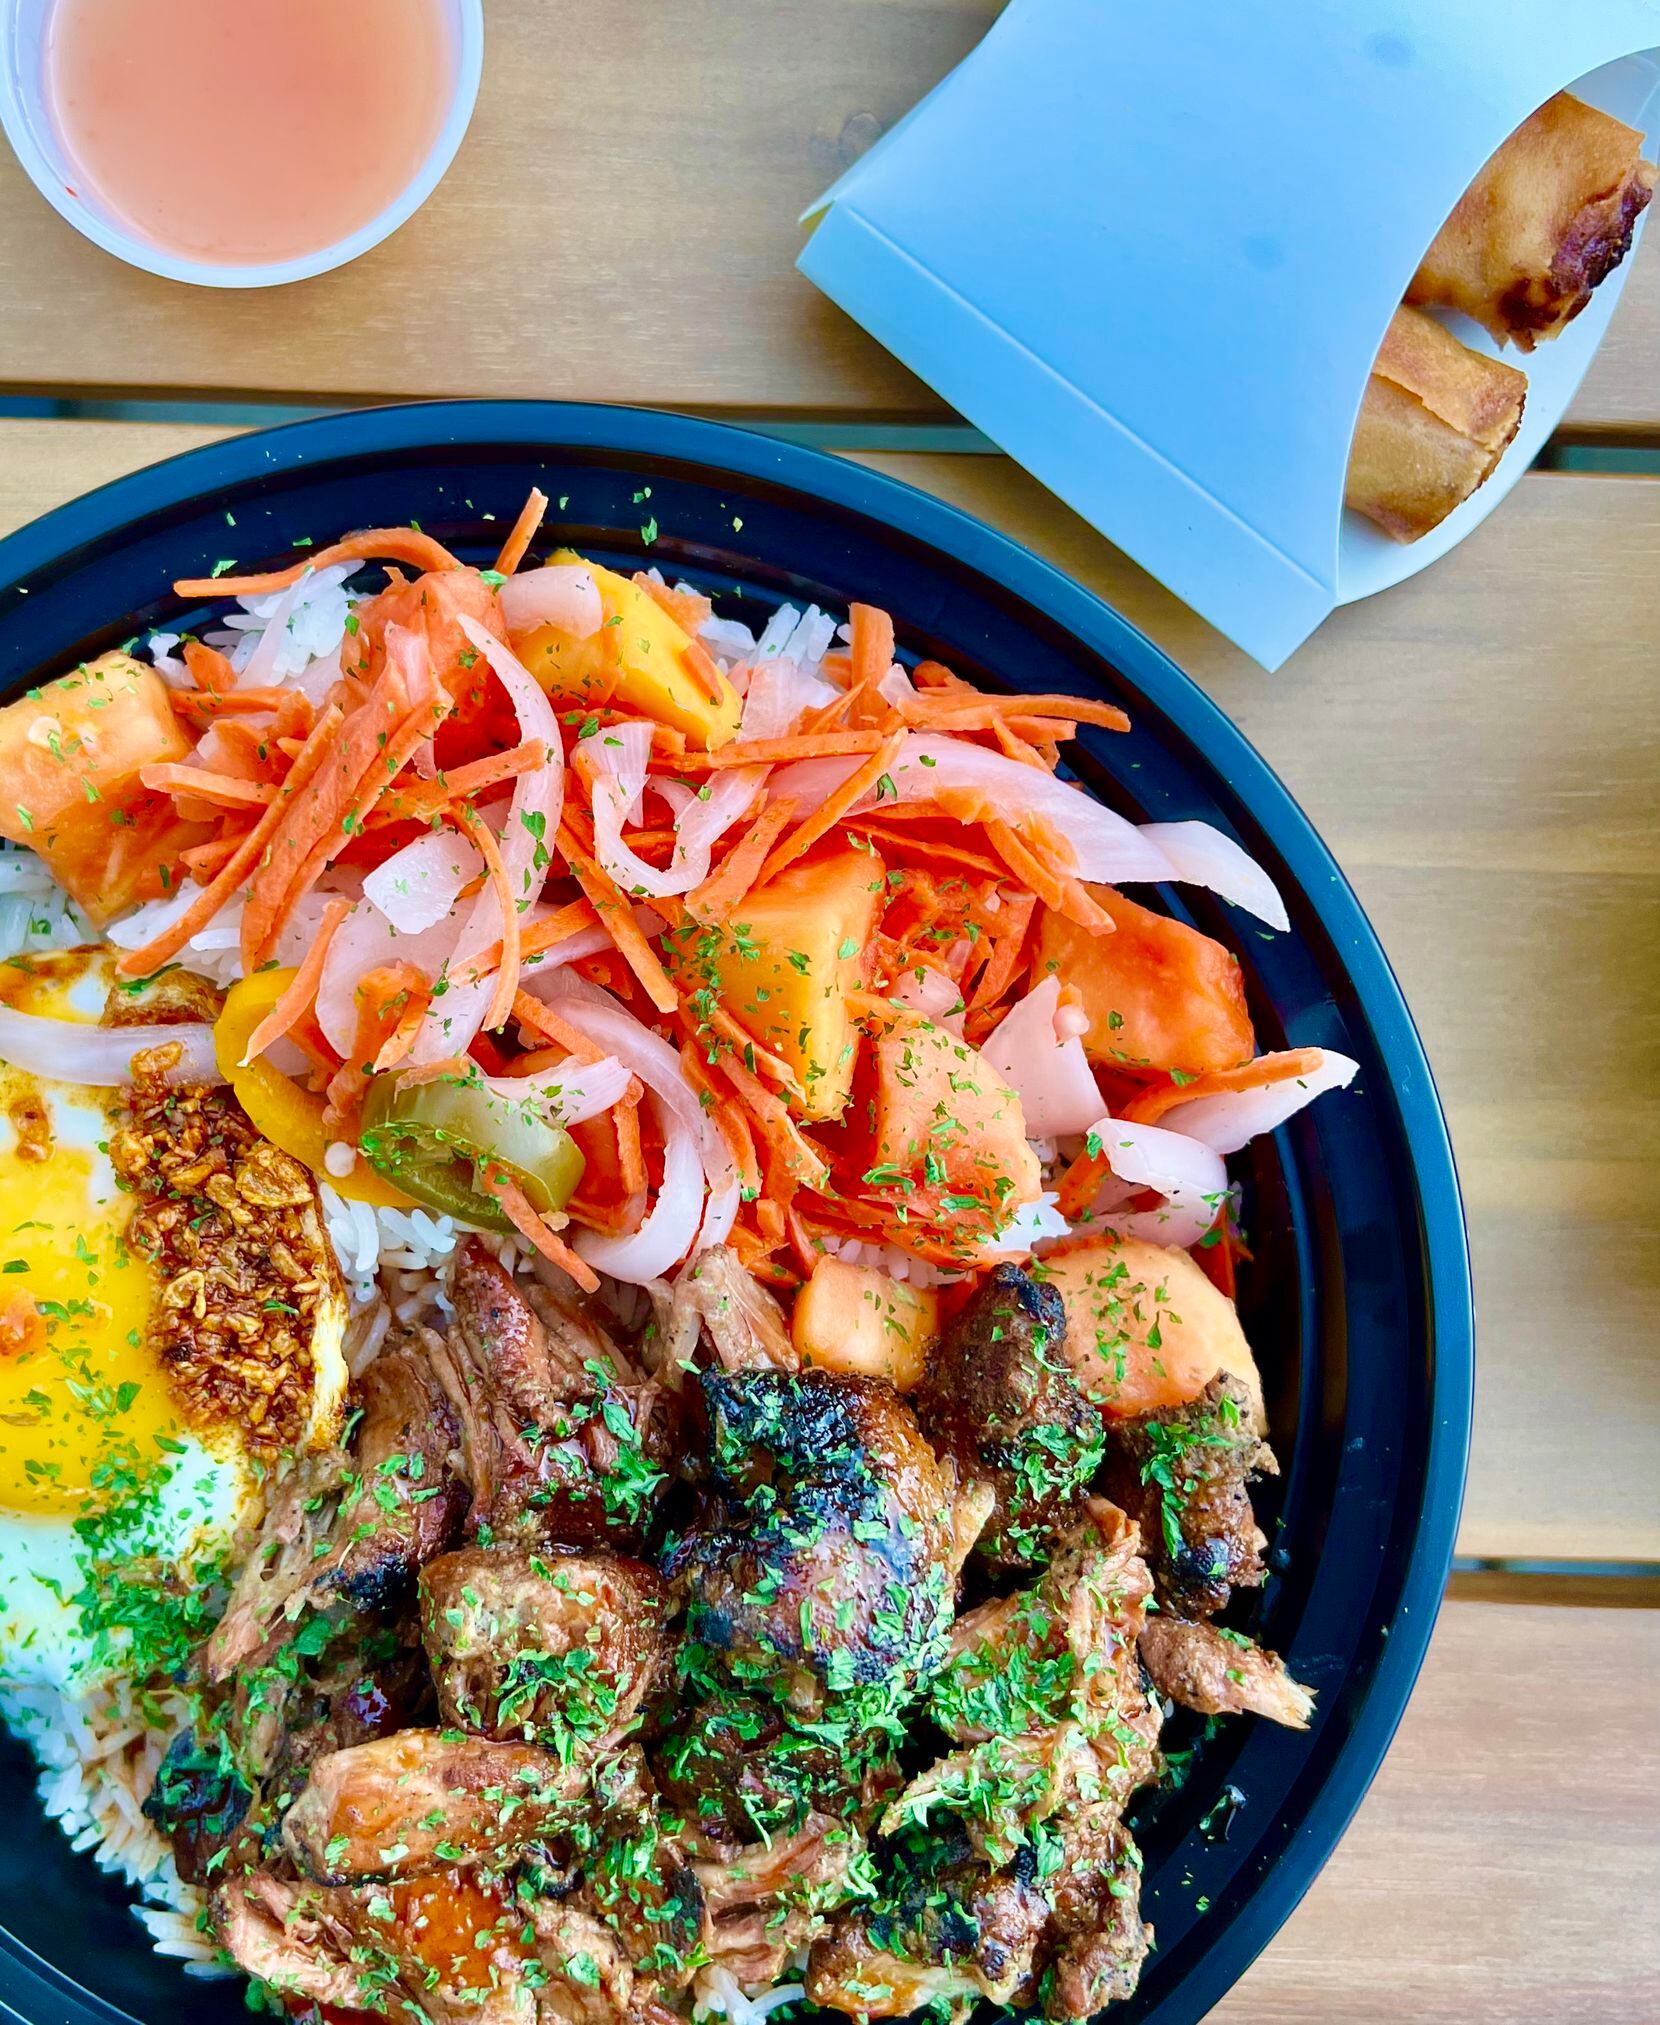 Ober Here is a new Filipino rice bowl restaurant in Fort Worth.